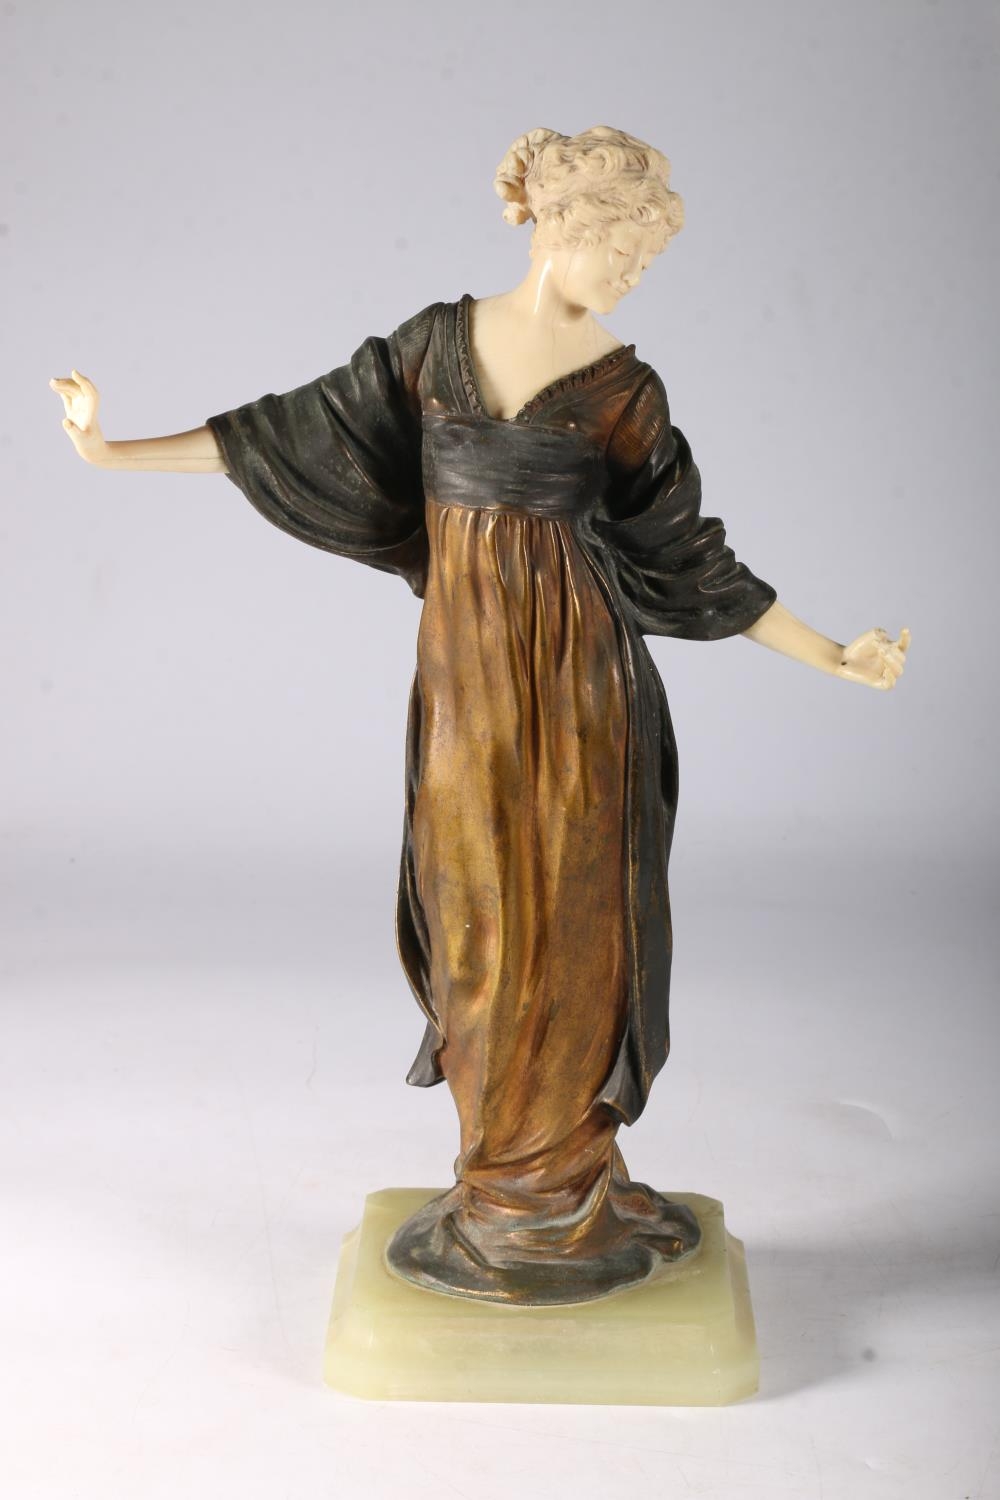 1920/30's sculpture of dancing woman in flowing bronze dress stamped France and 70V, on green onyx